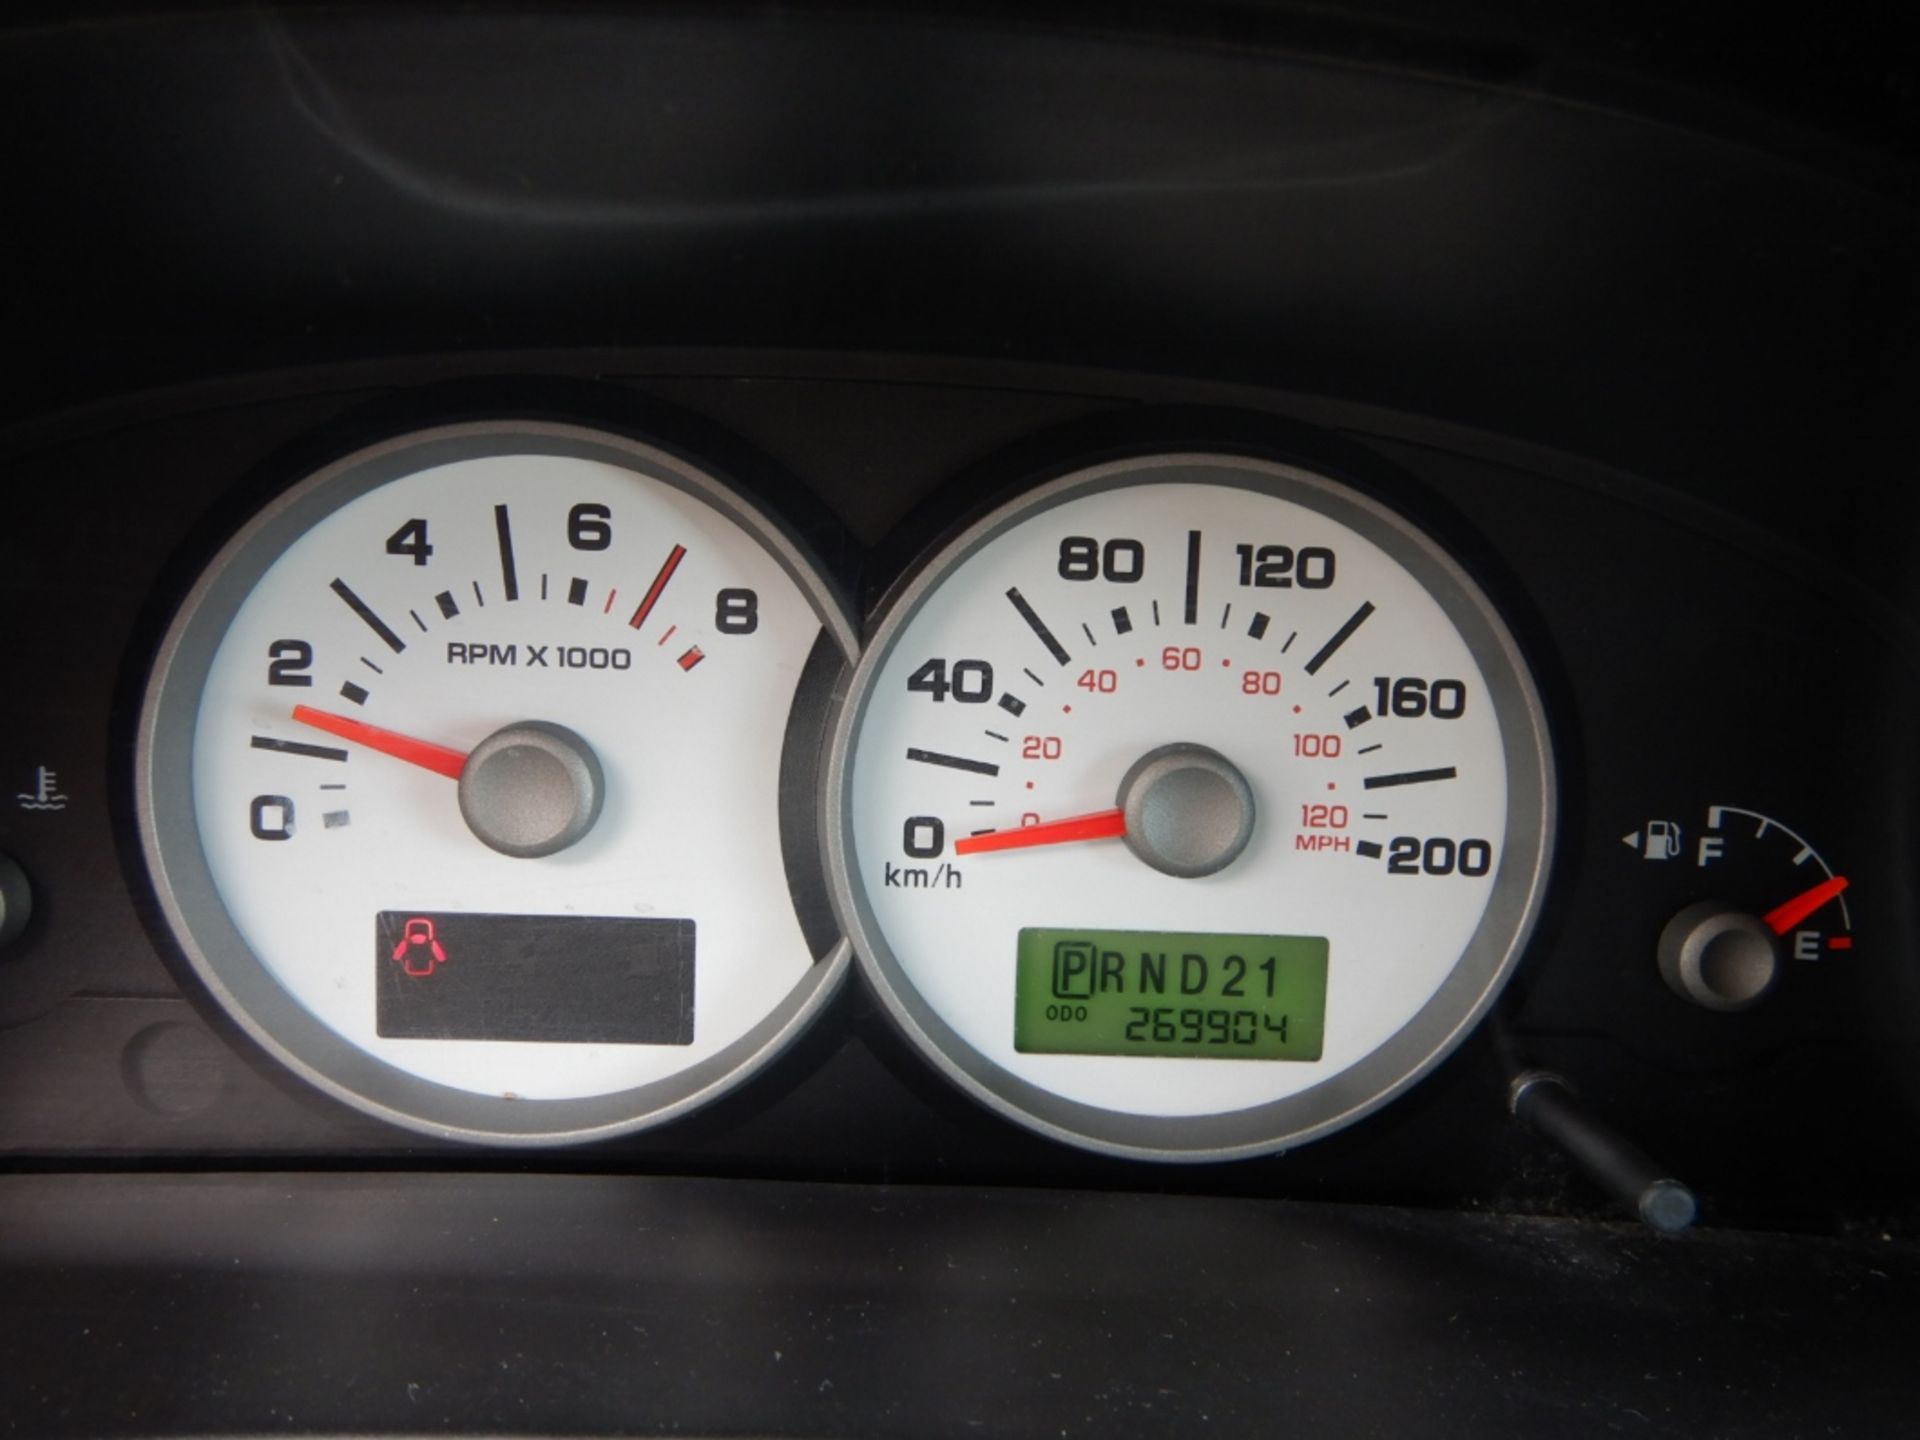 2005 FORD ESCAPE XLT, AWD, 3.0L V6, AUTOMATIC, POWER WINDOW, POWER DOOR LOCKS, 269,904 KM'S SHOWING, - Image 9 of 10